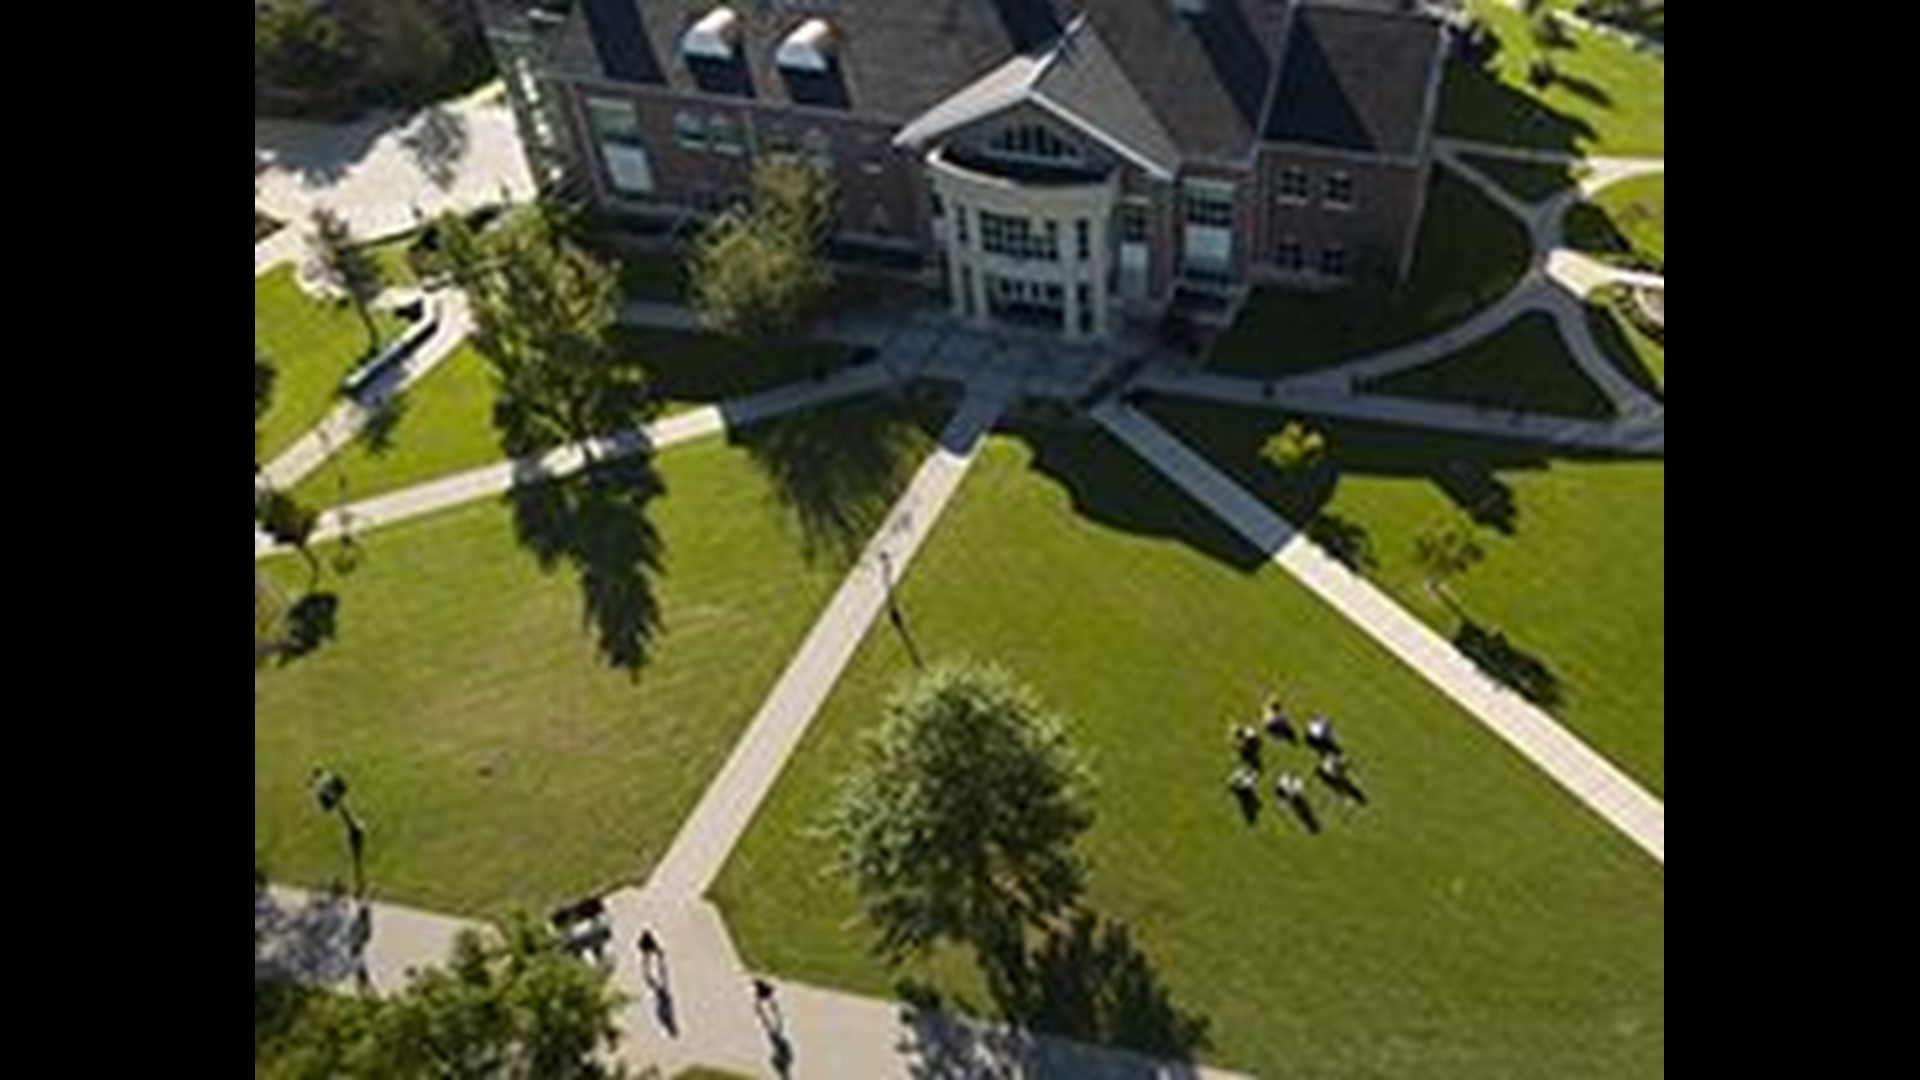 Juniata College announces plans to reopen campus for the fall semester